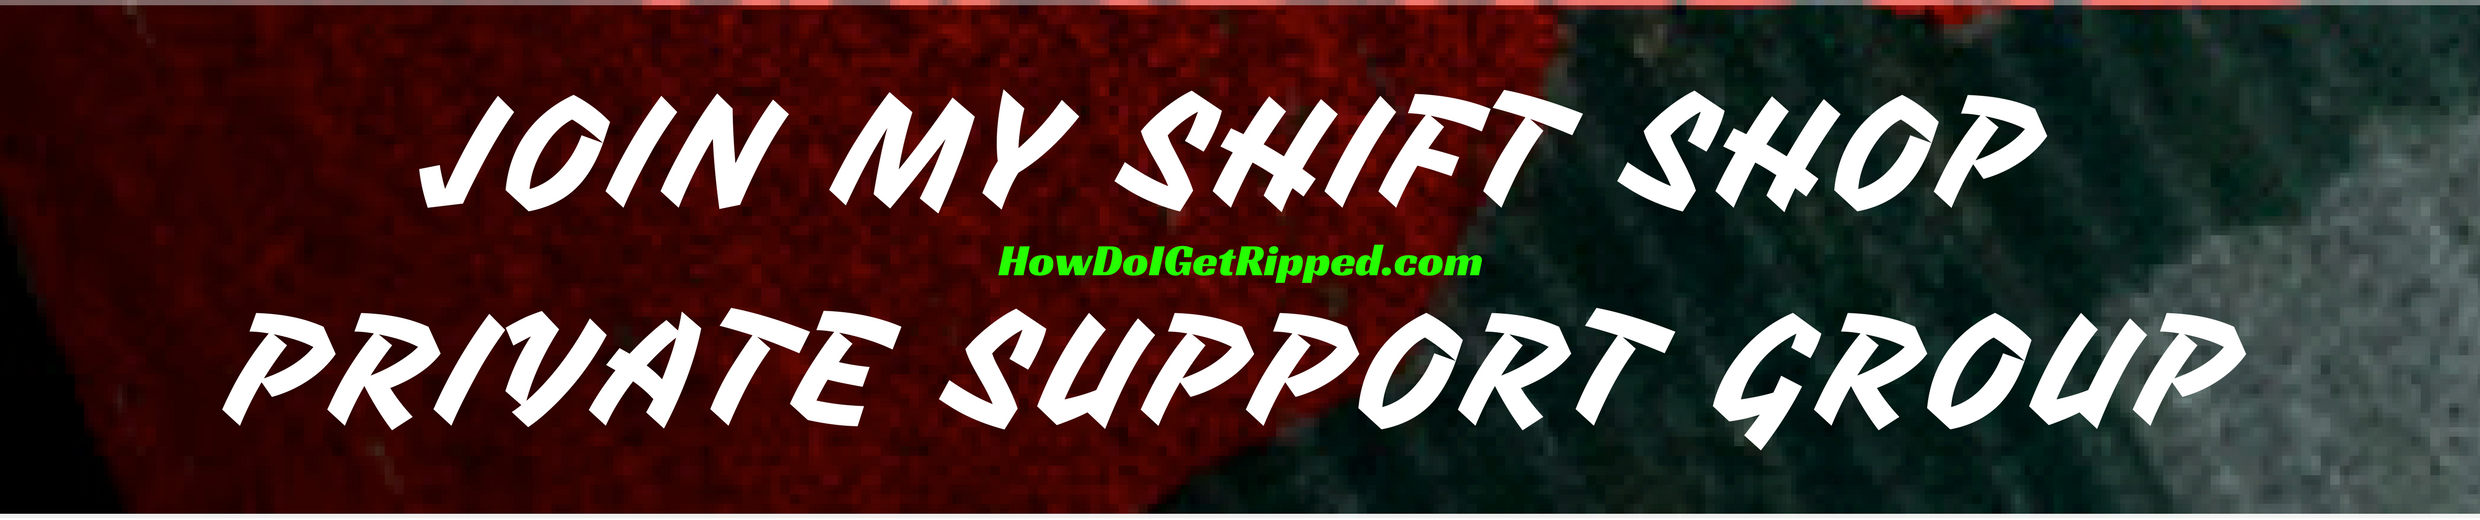 Shift Shop Review Support Group